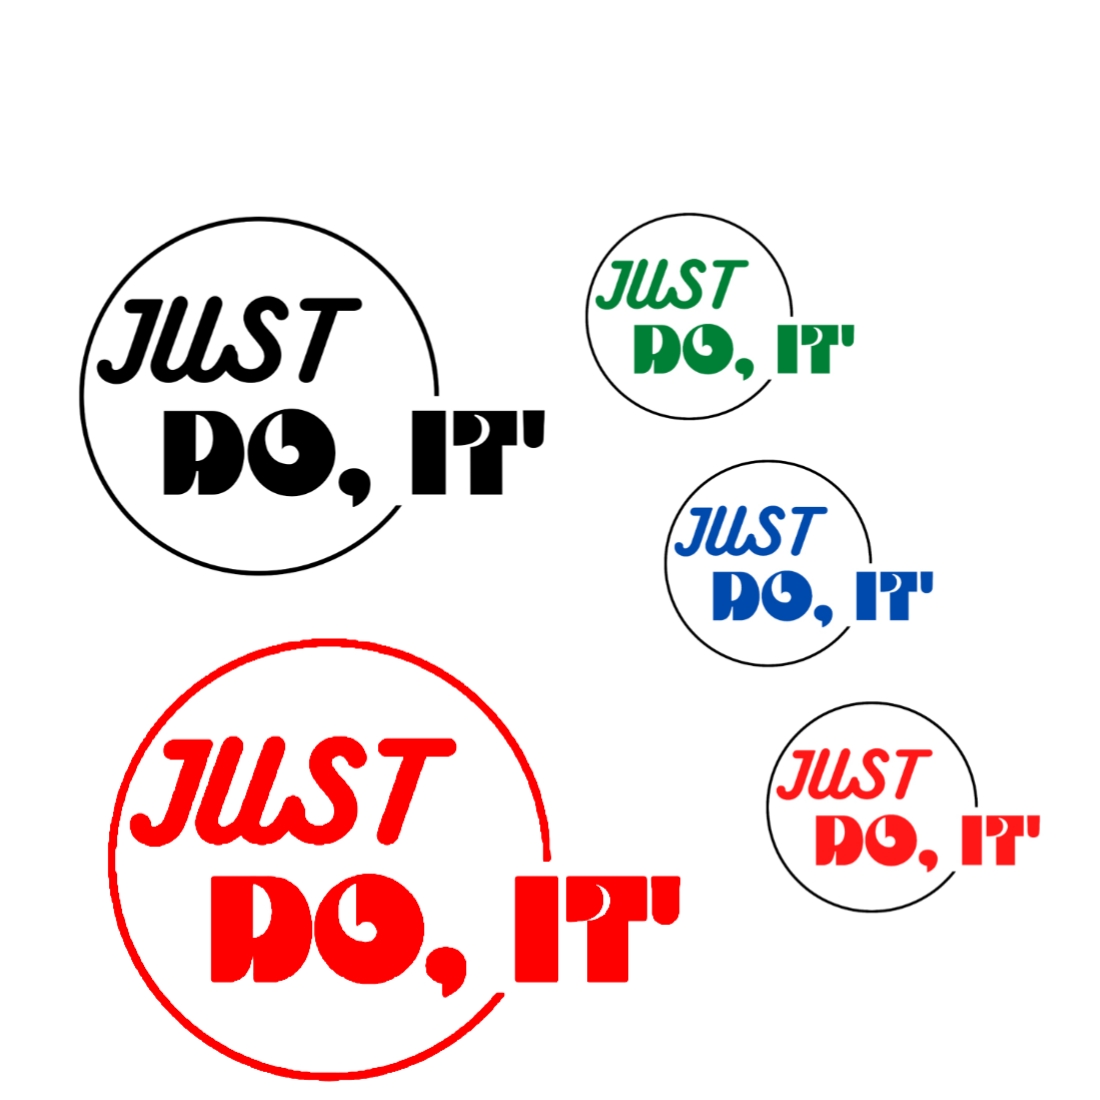 Just Do It Typography T-shirts Design cover image.